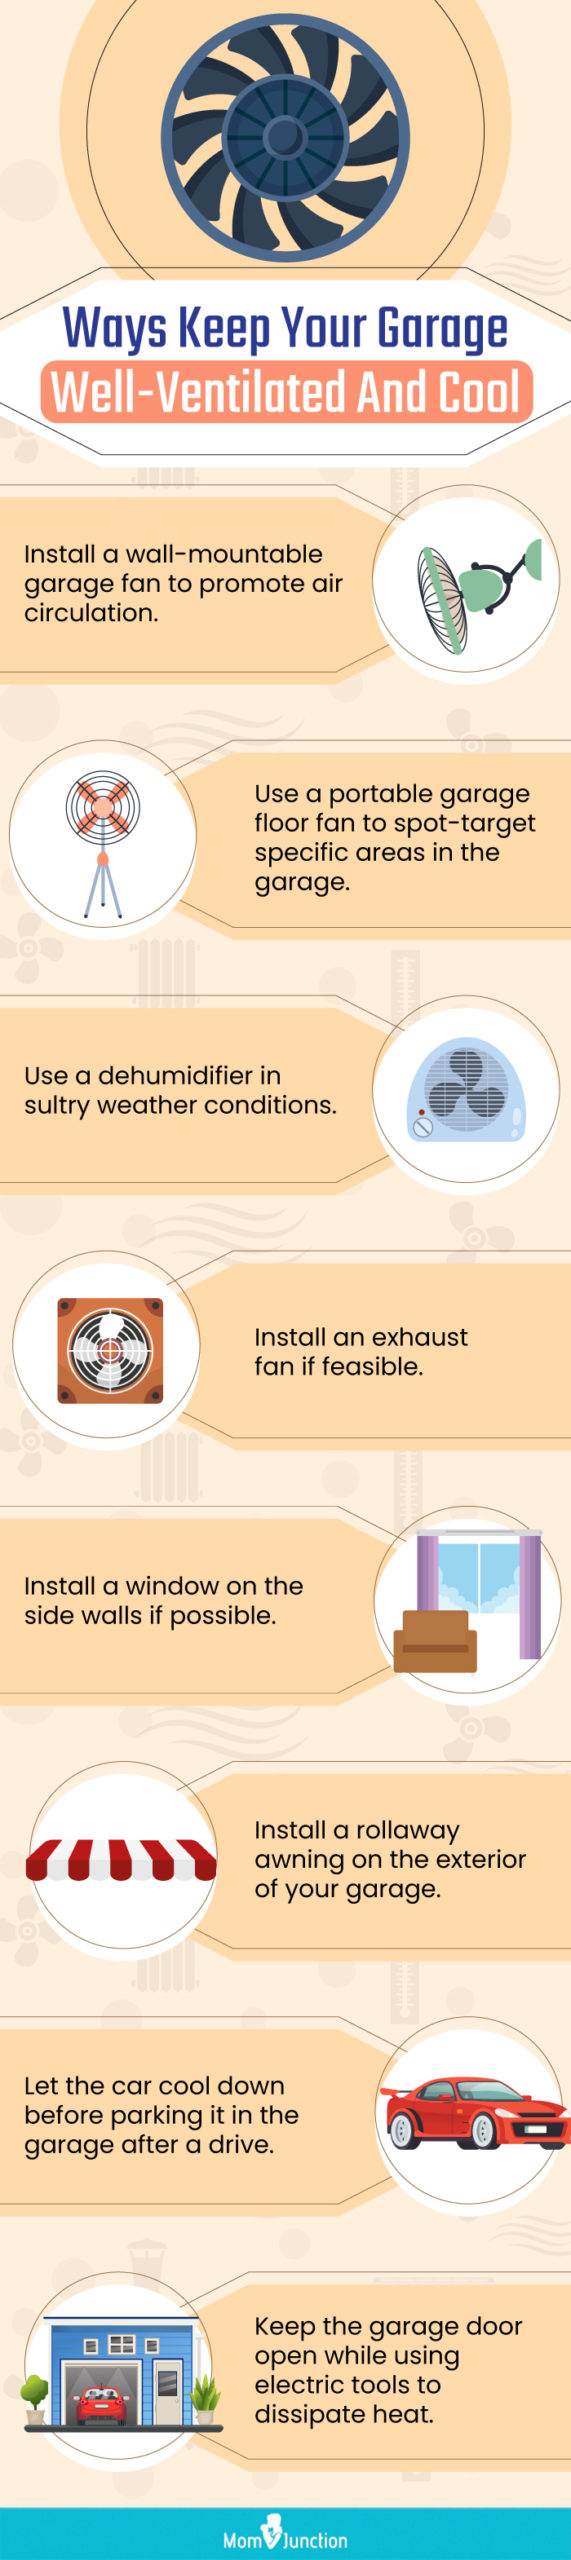 Ways Keep Your Garage Well Ventilated And Cool(infographic)